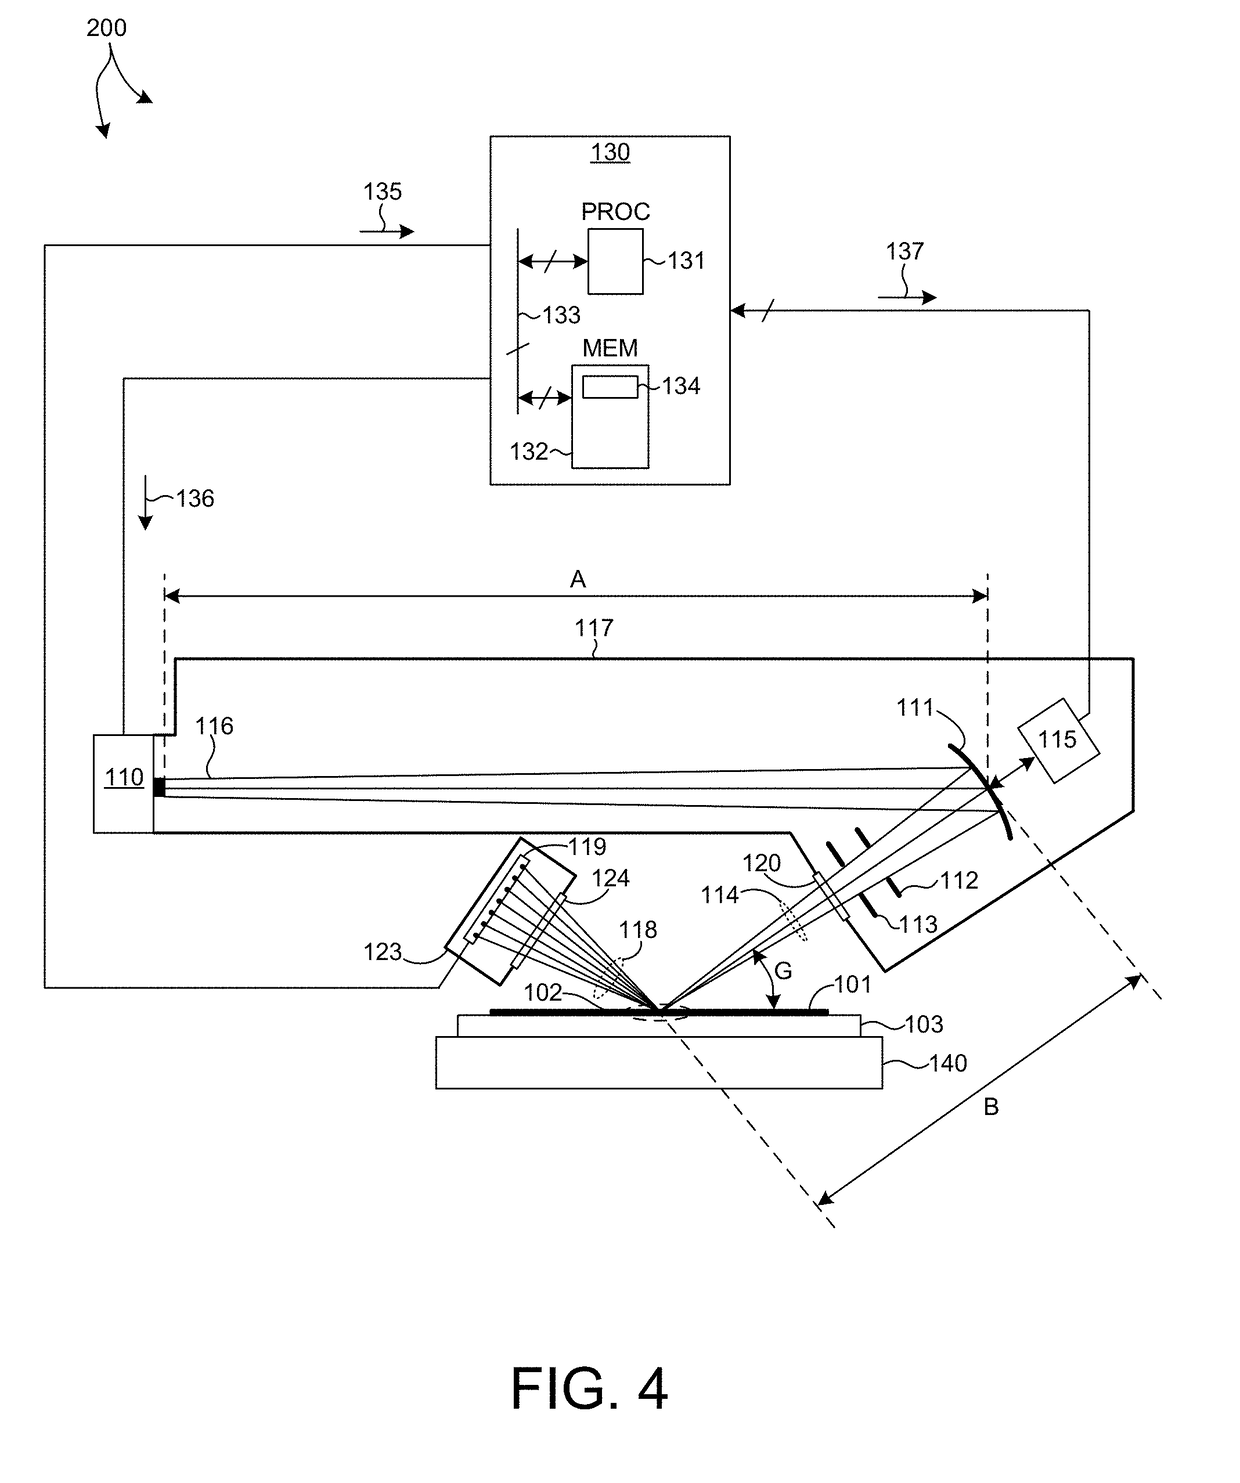 Methods And Systems For Semiconductor Metrology Based On Polychromatic Soft X-Ray Diffraction